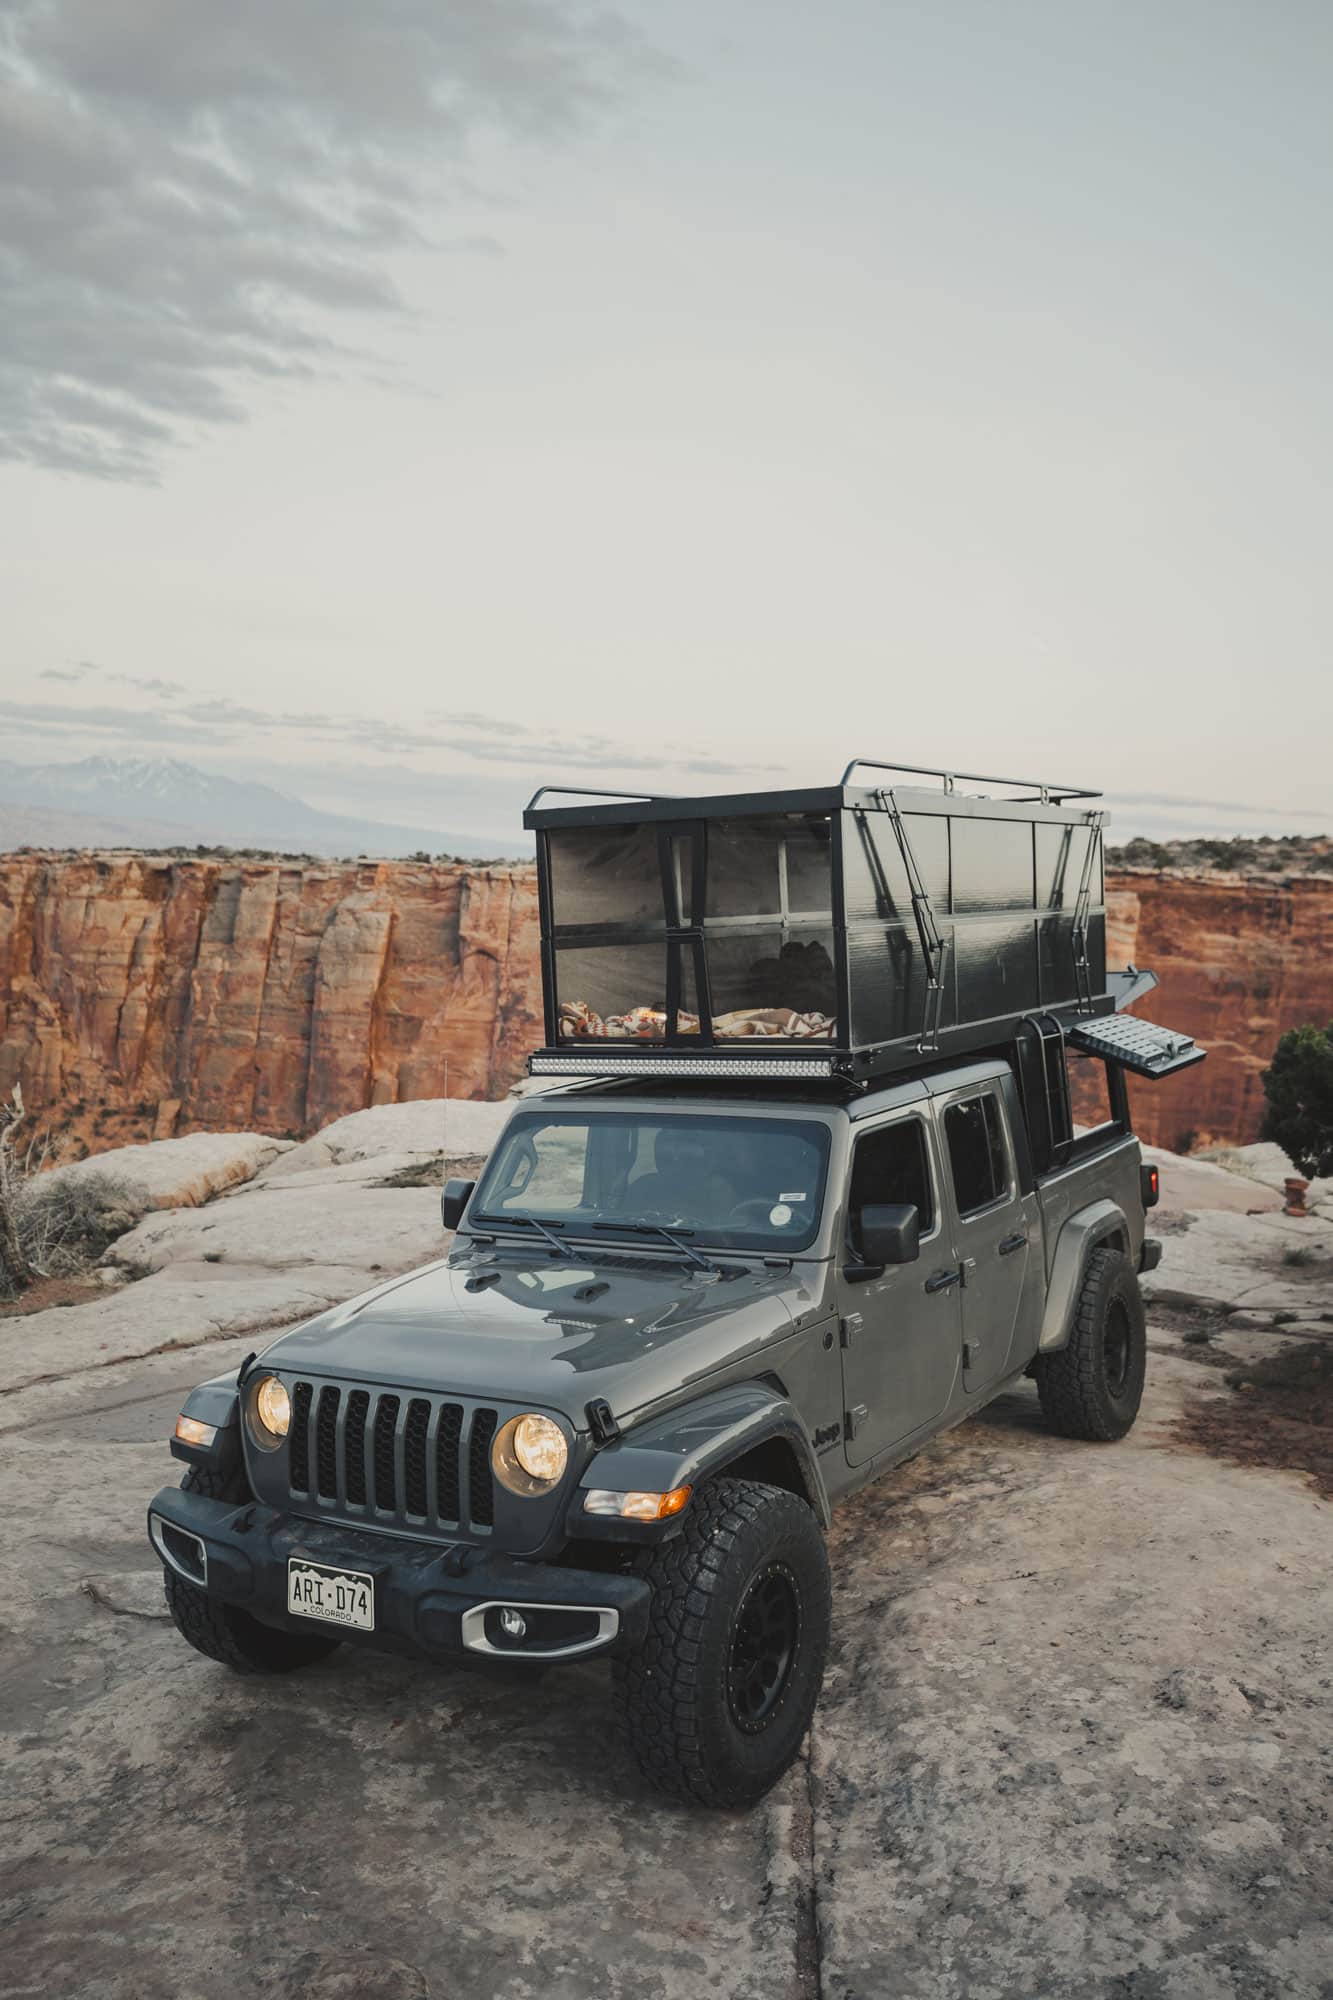 A jeep truck sits on top of a desert canyon with a camping pop-up attached to the roof.